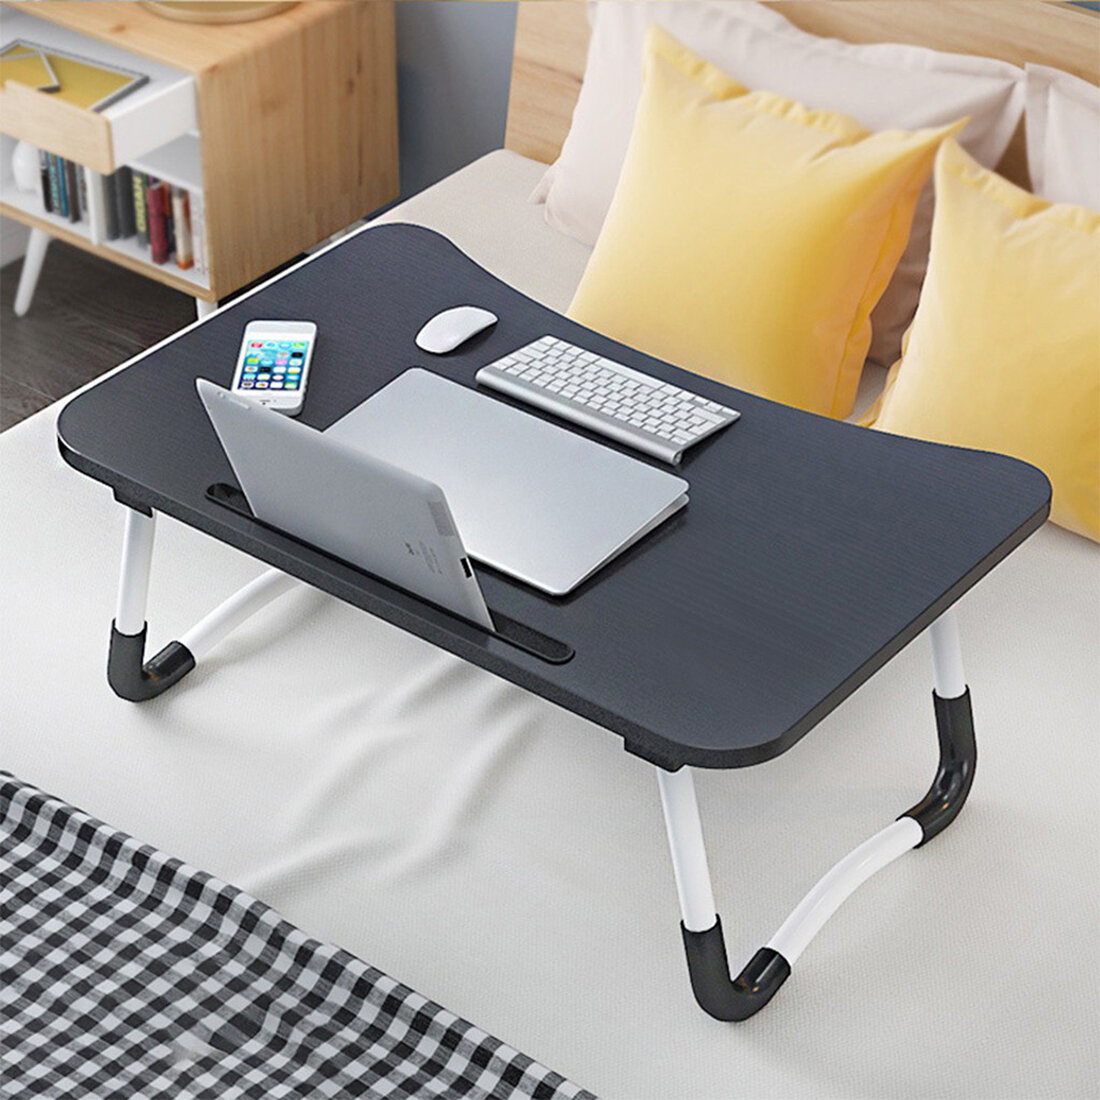 Foldable Bed Tray Table 23.6 Portable Laptop Stand Desk with Storage Drawer Laptop Desk Breakfast Tray Notebook Stand for Bed Couch Sofa Floor Slot and Cup Holder 